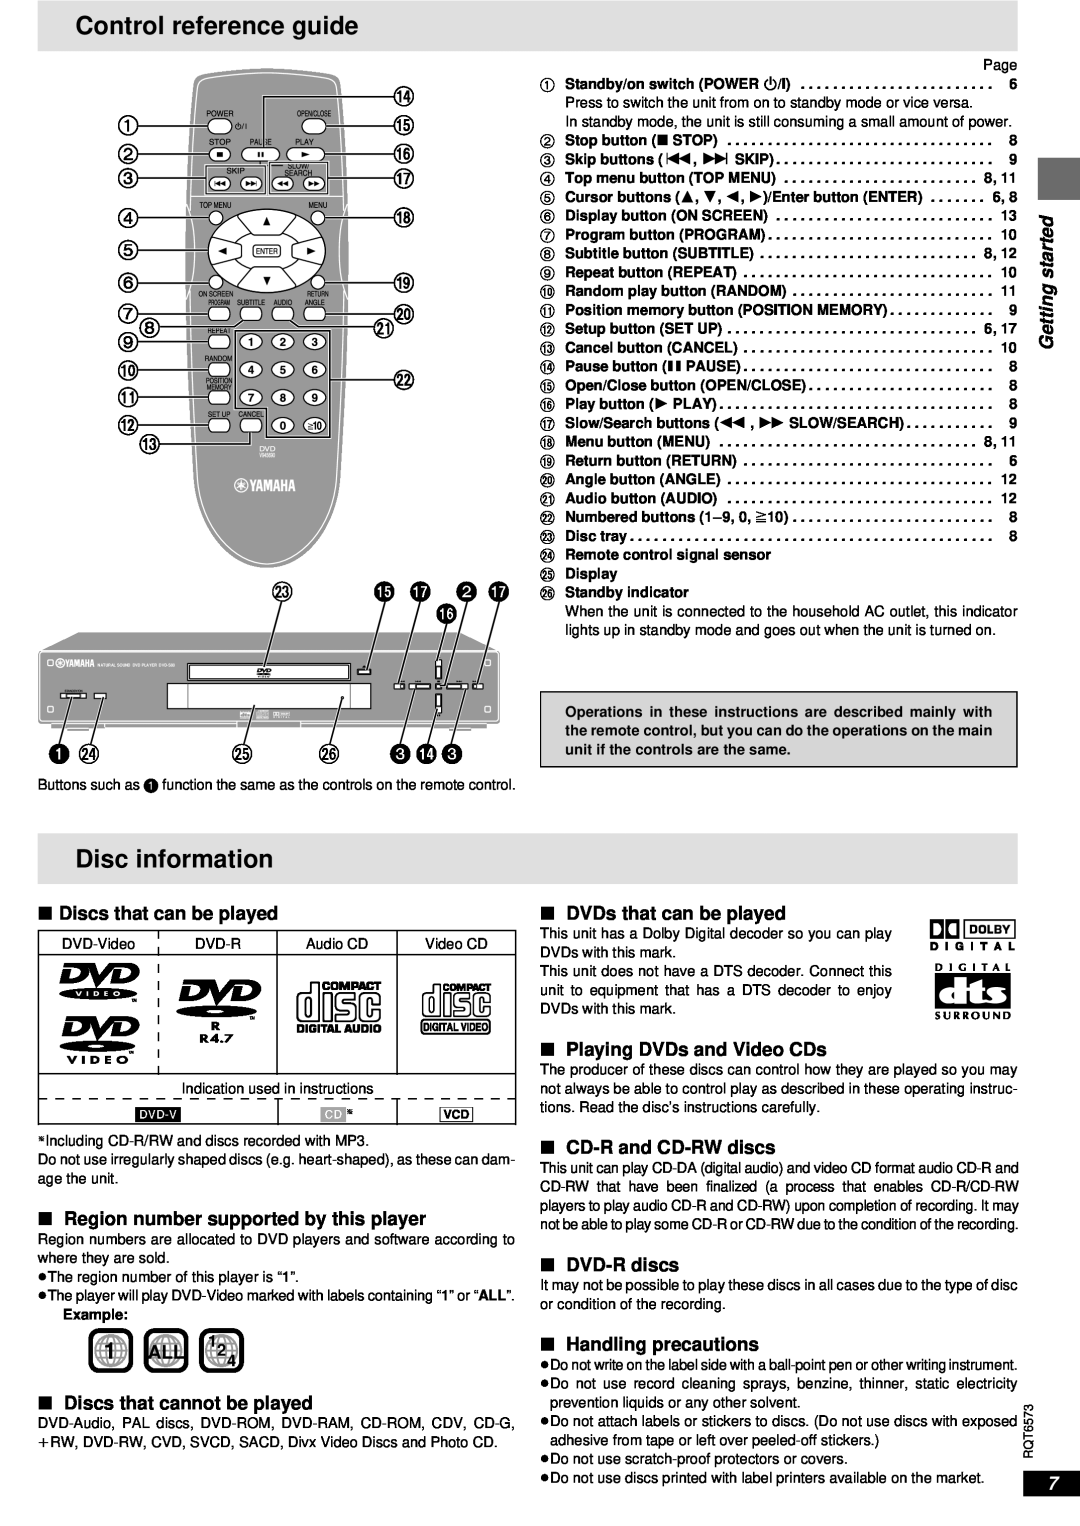 Yamaha AVX-S80 Control reference guide, Disc information, G ? A 2 A @, J 3 >, Getting started, ∫Discs that can be played 